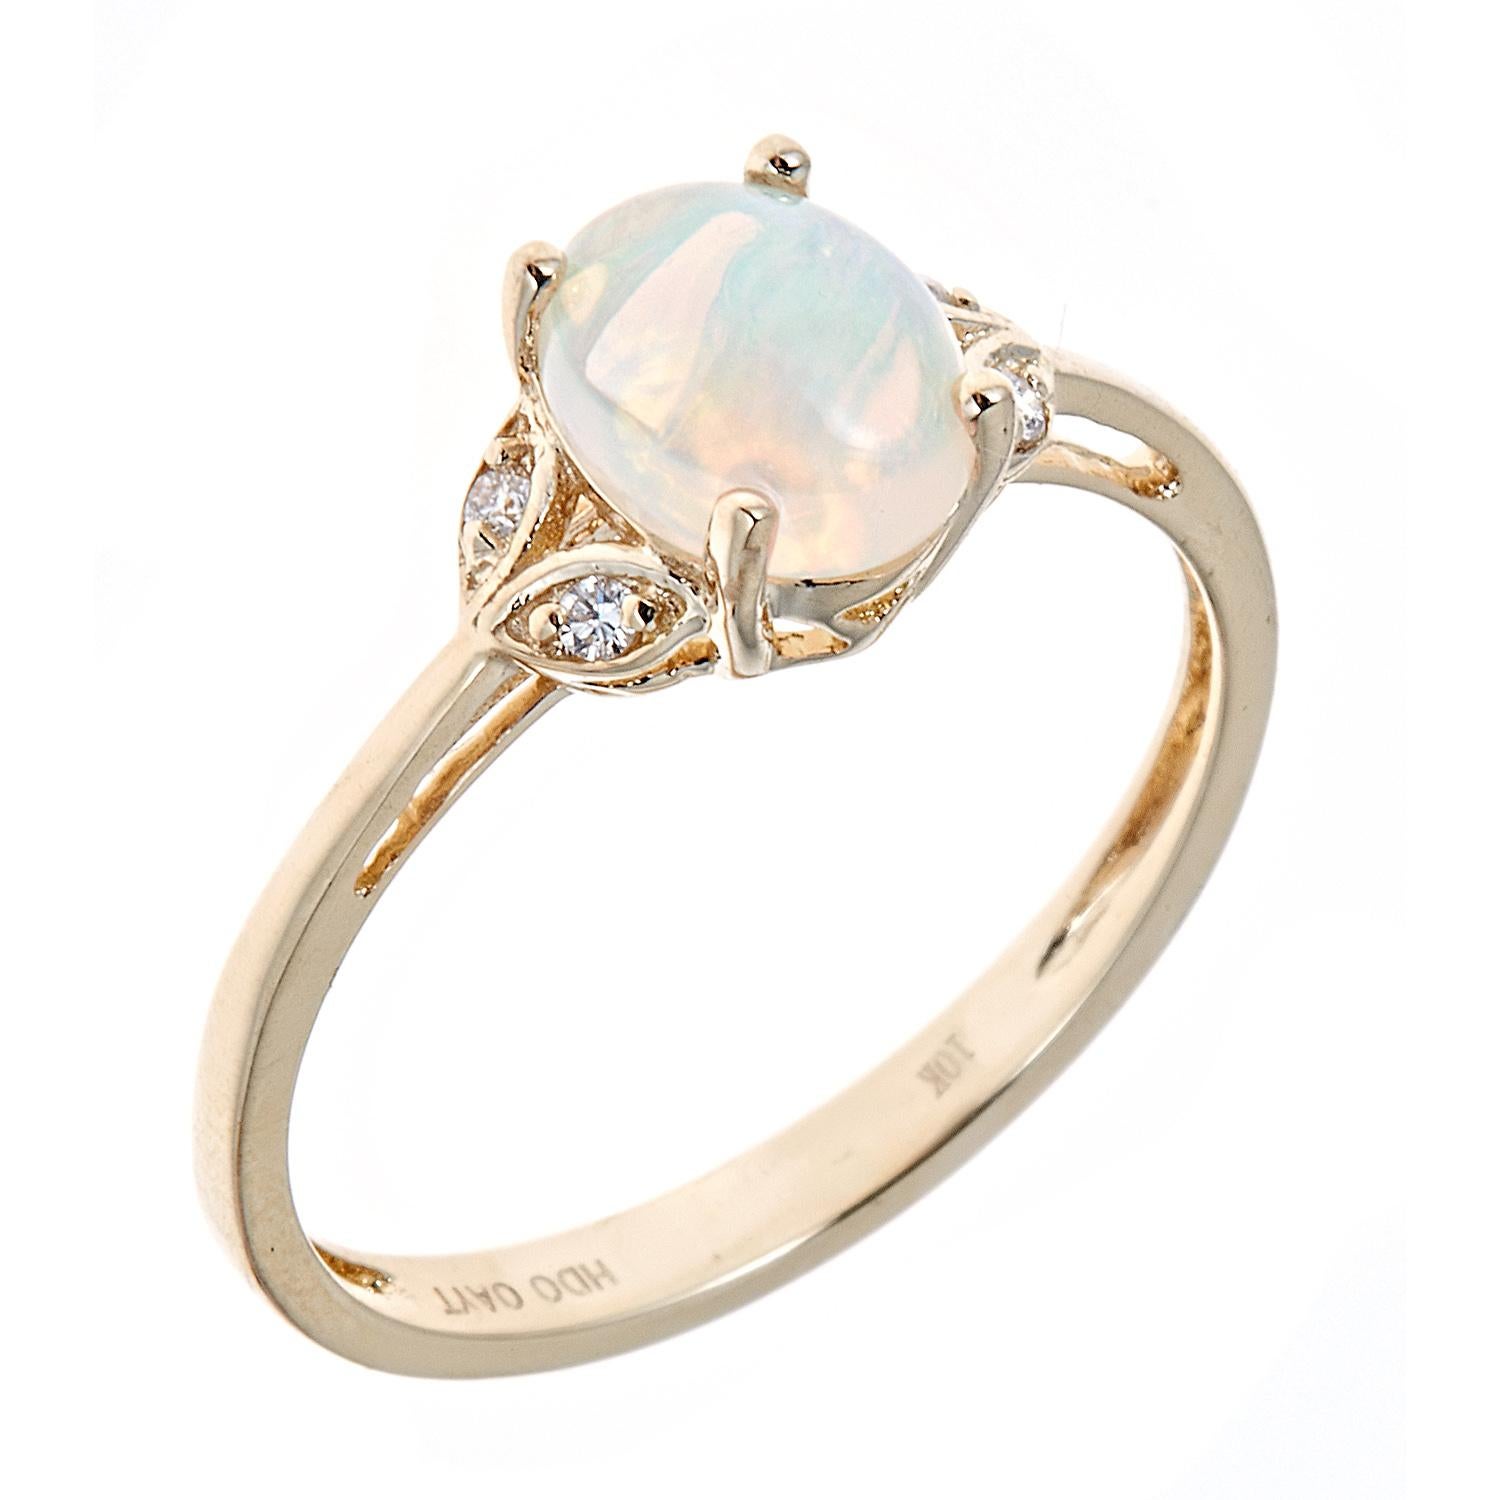 Decorate yourself in elegance with this Ring is crafted from 10-karat Yellow Gold by Gin & Grace Ring. This Ring is made up of 8x6 mm Oval-Cab Ethiopian Opal (1Pcs) 0.87 Carat and Round-cut White Diamond (4 Pcs) 0.03 Carat. This Ring is weight 1.38